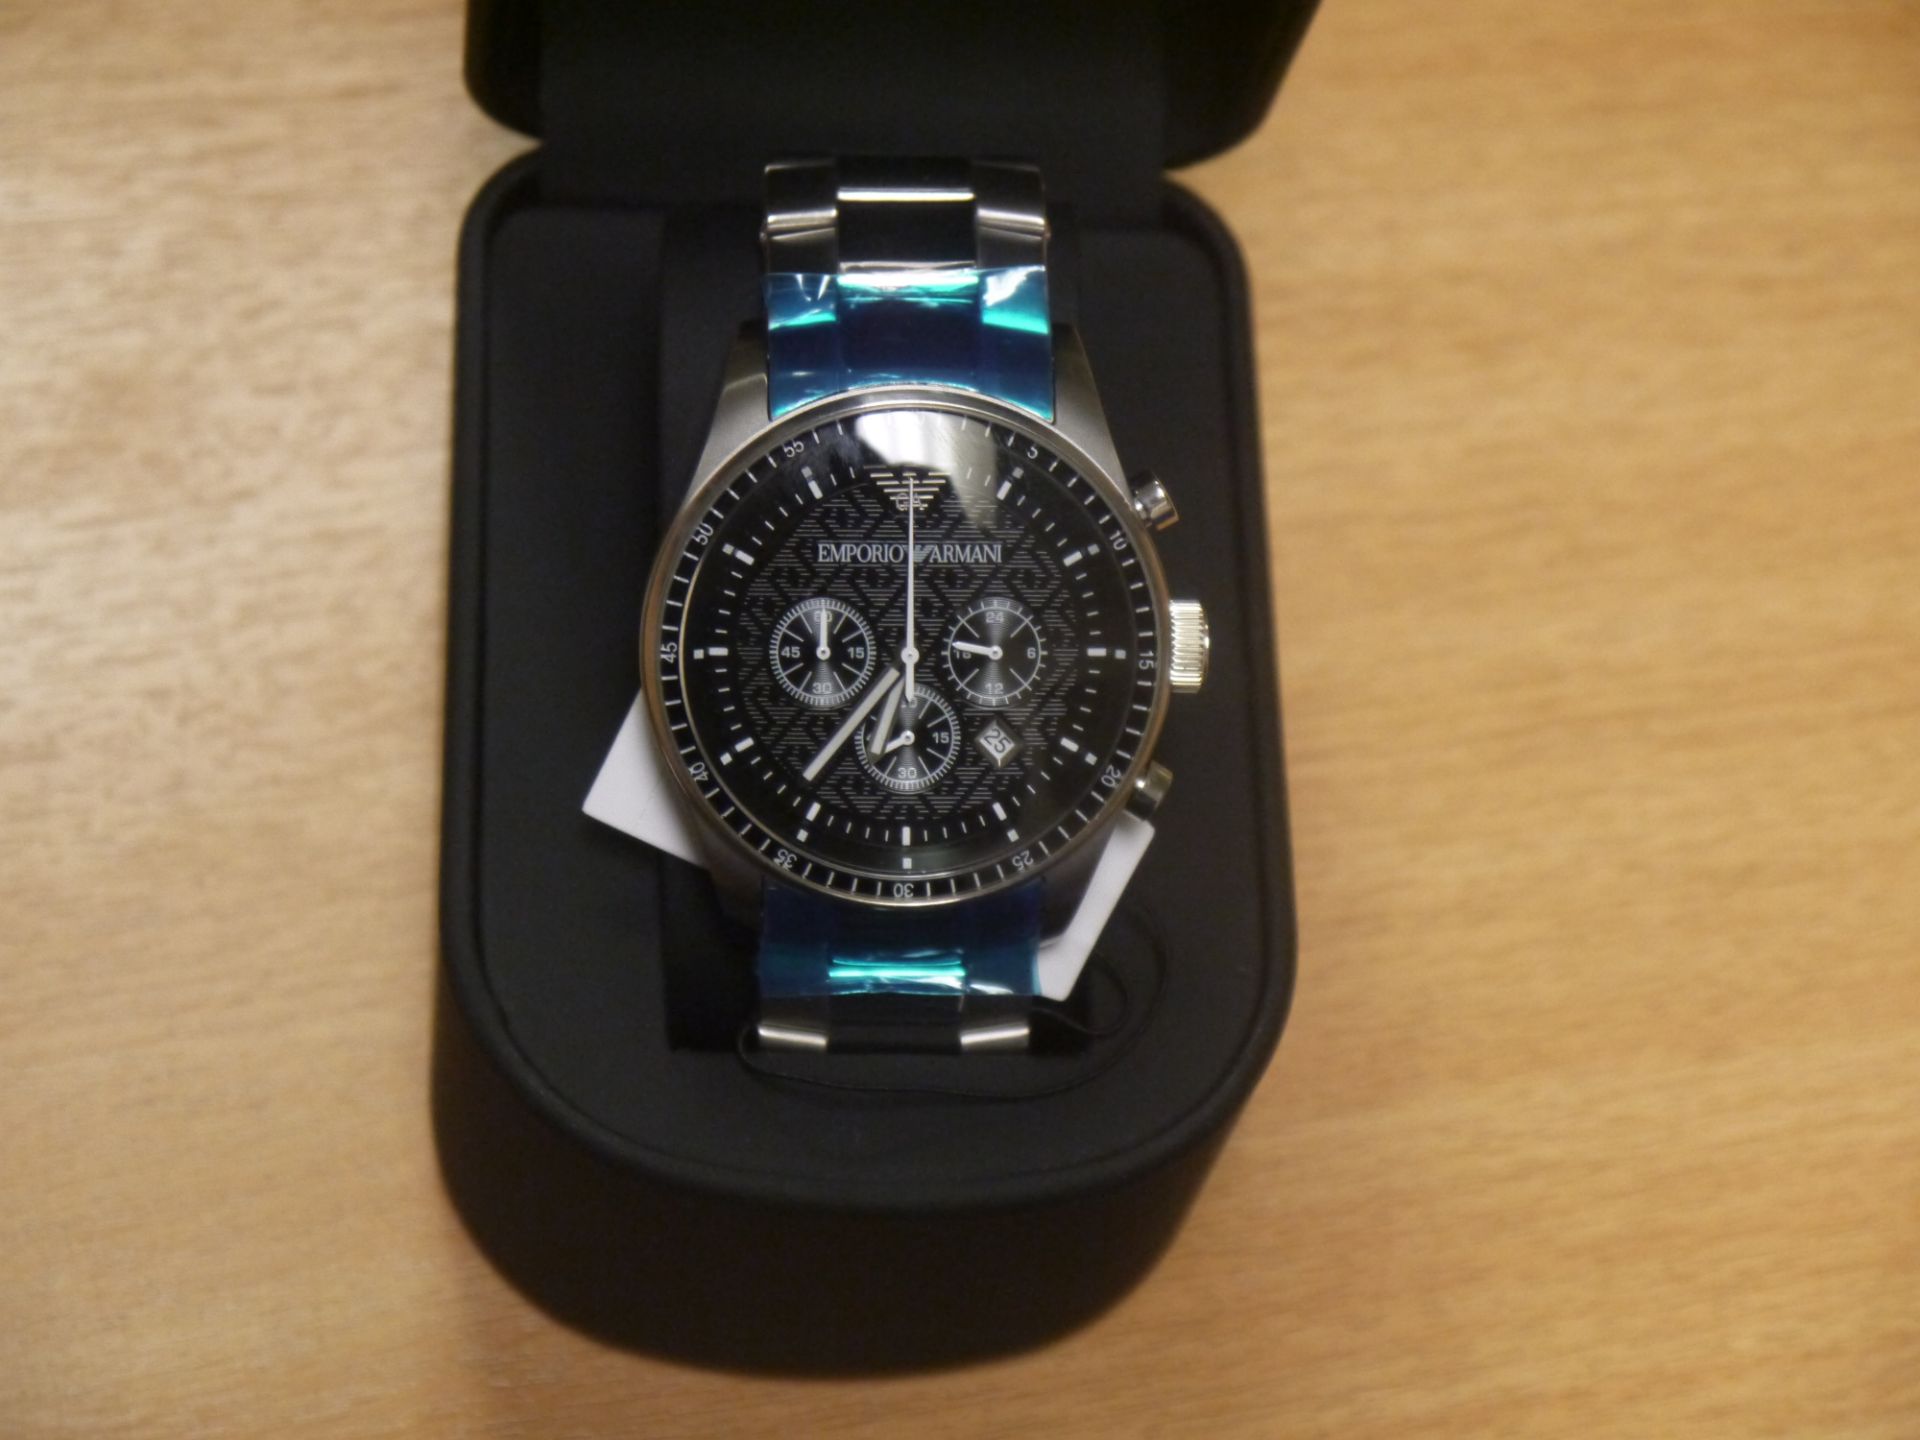 NO VAT!! Armani AR0585 Mens Chronograph Watch. New, boxed and ticking.